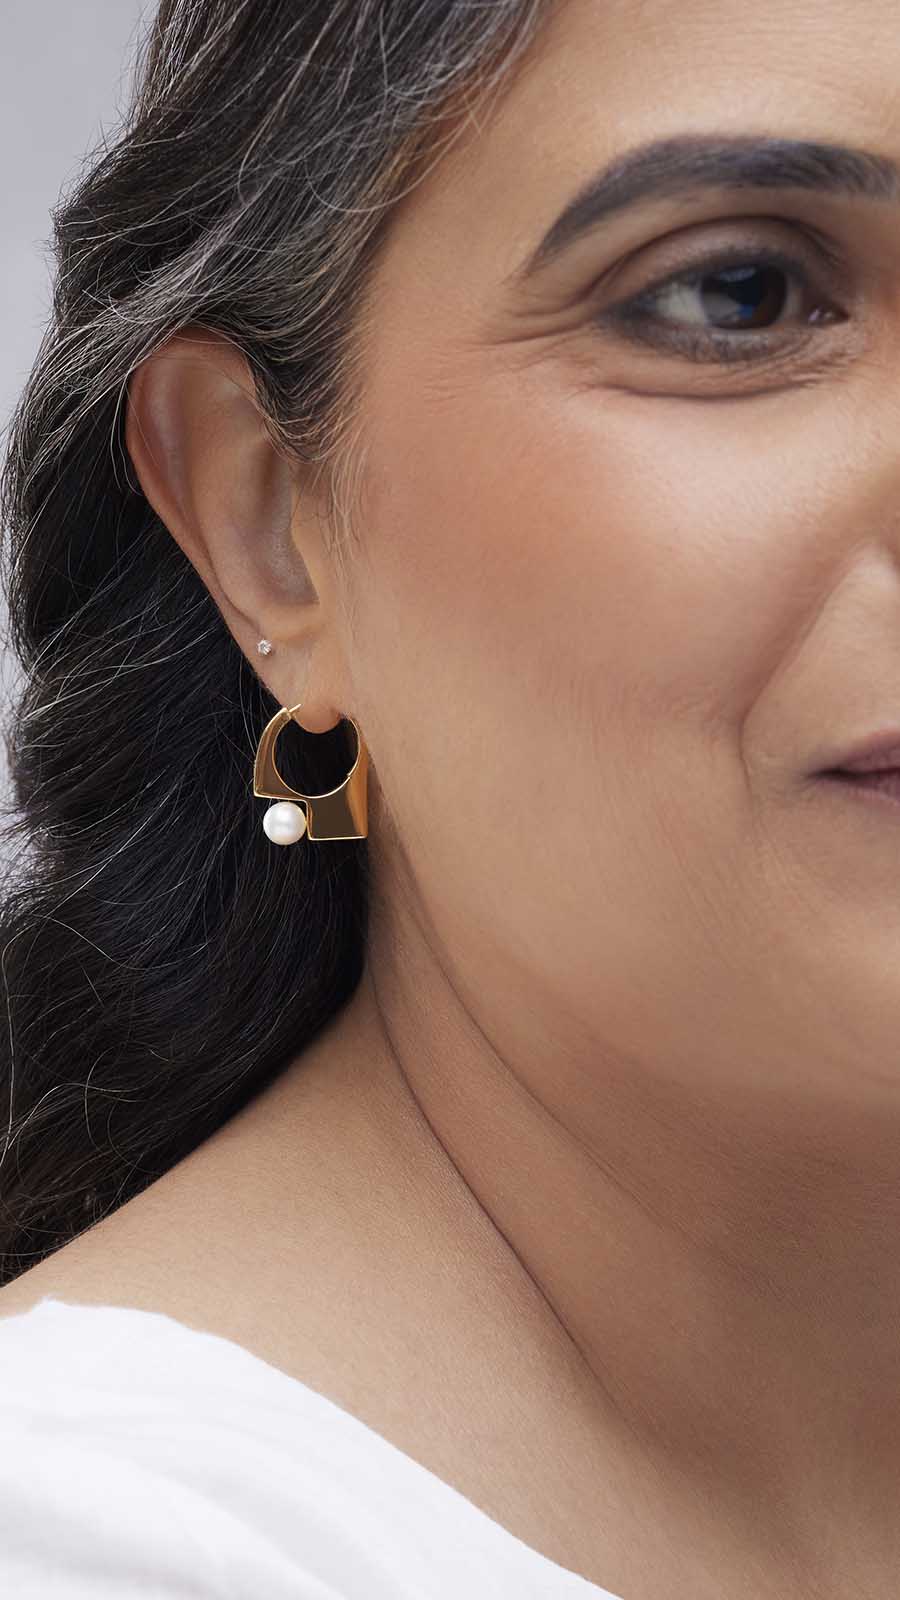 Zoomed picture of an indian working woman wearing patience earrings